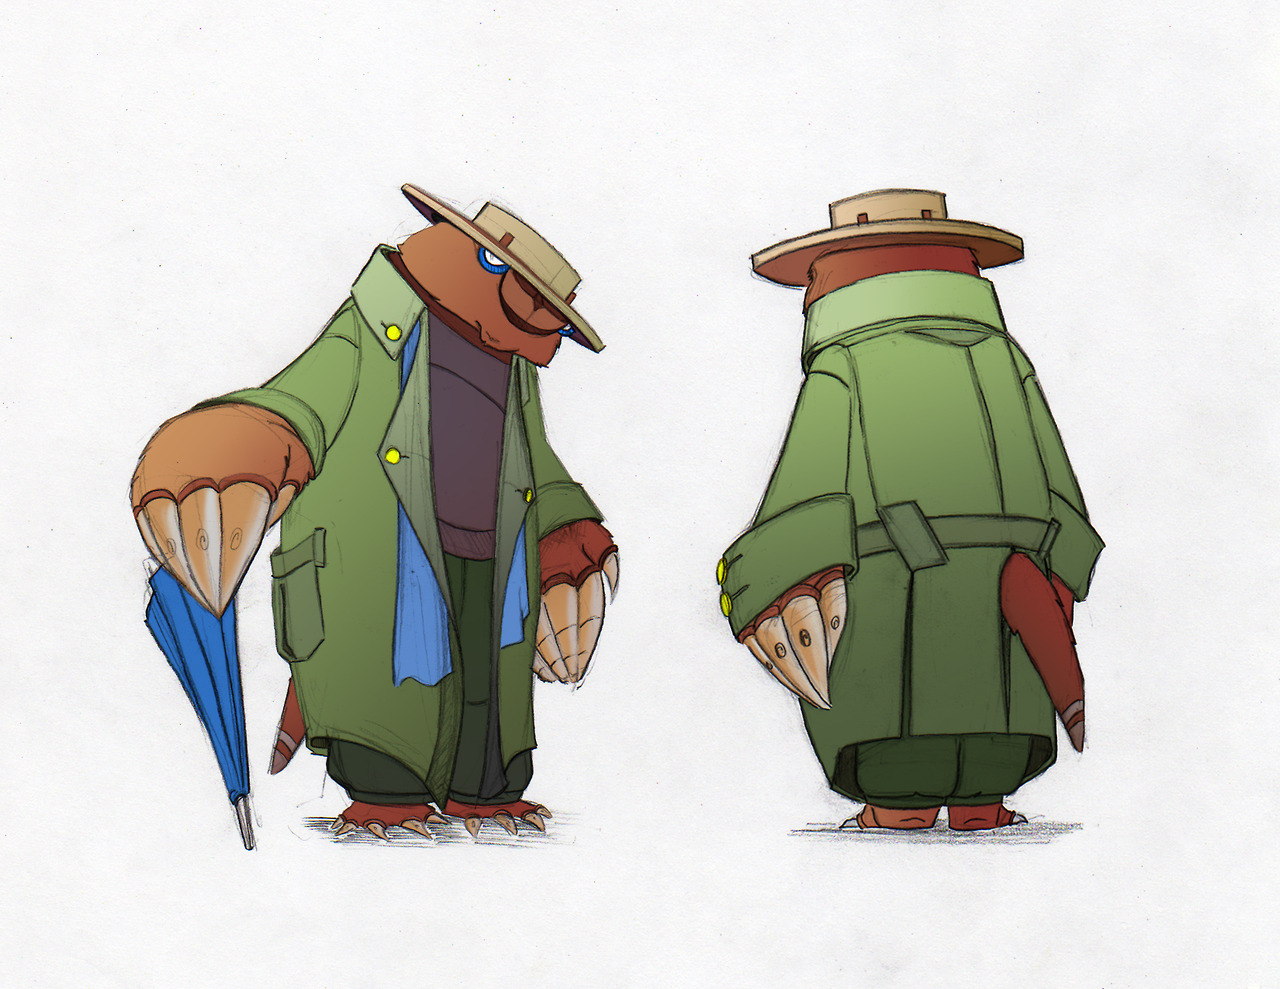 Pencil drawing of a shady mole character in panama hat and trench coat